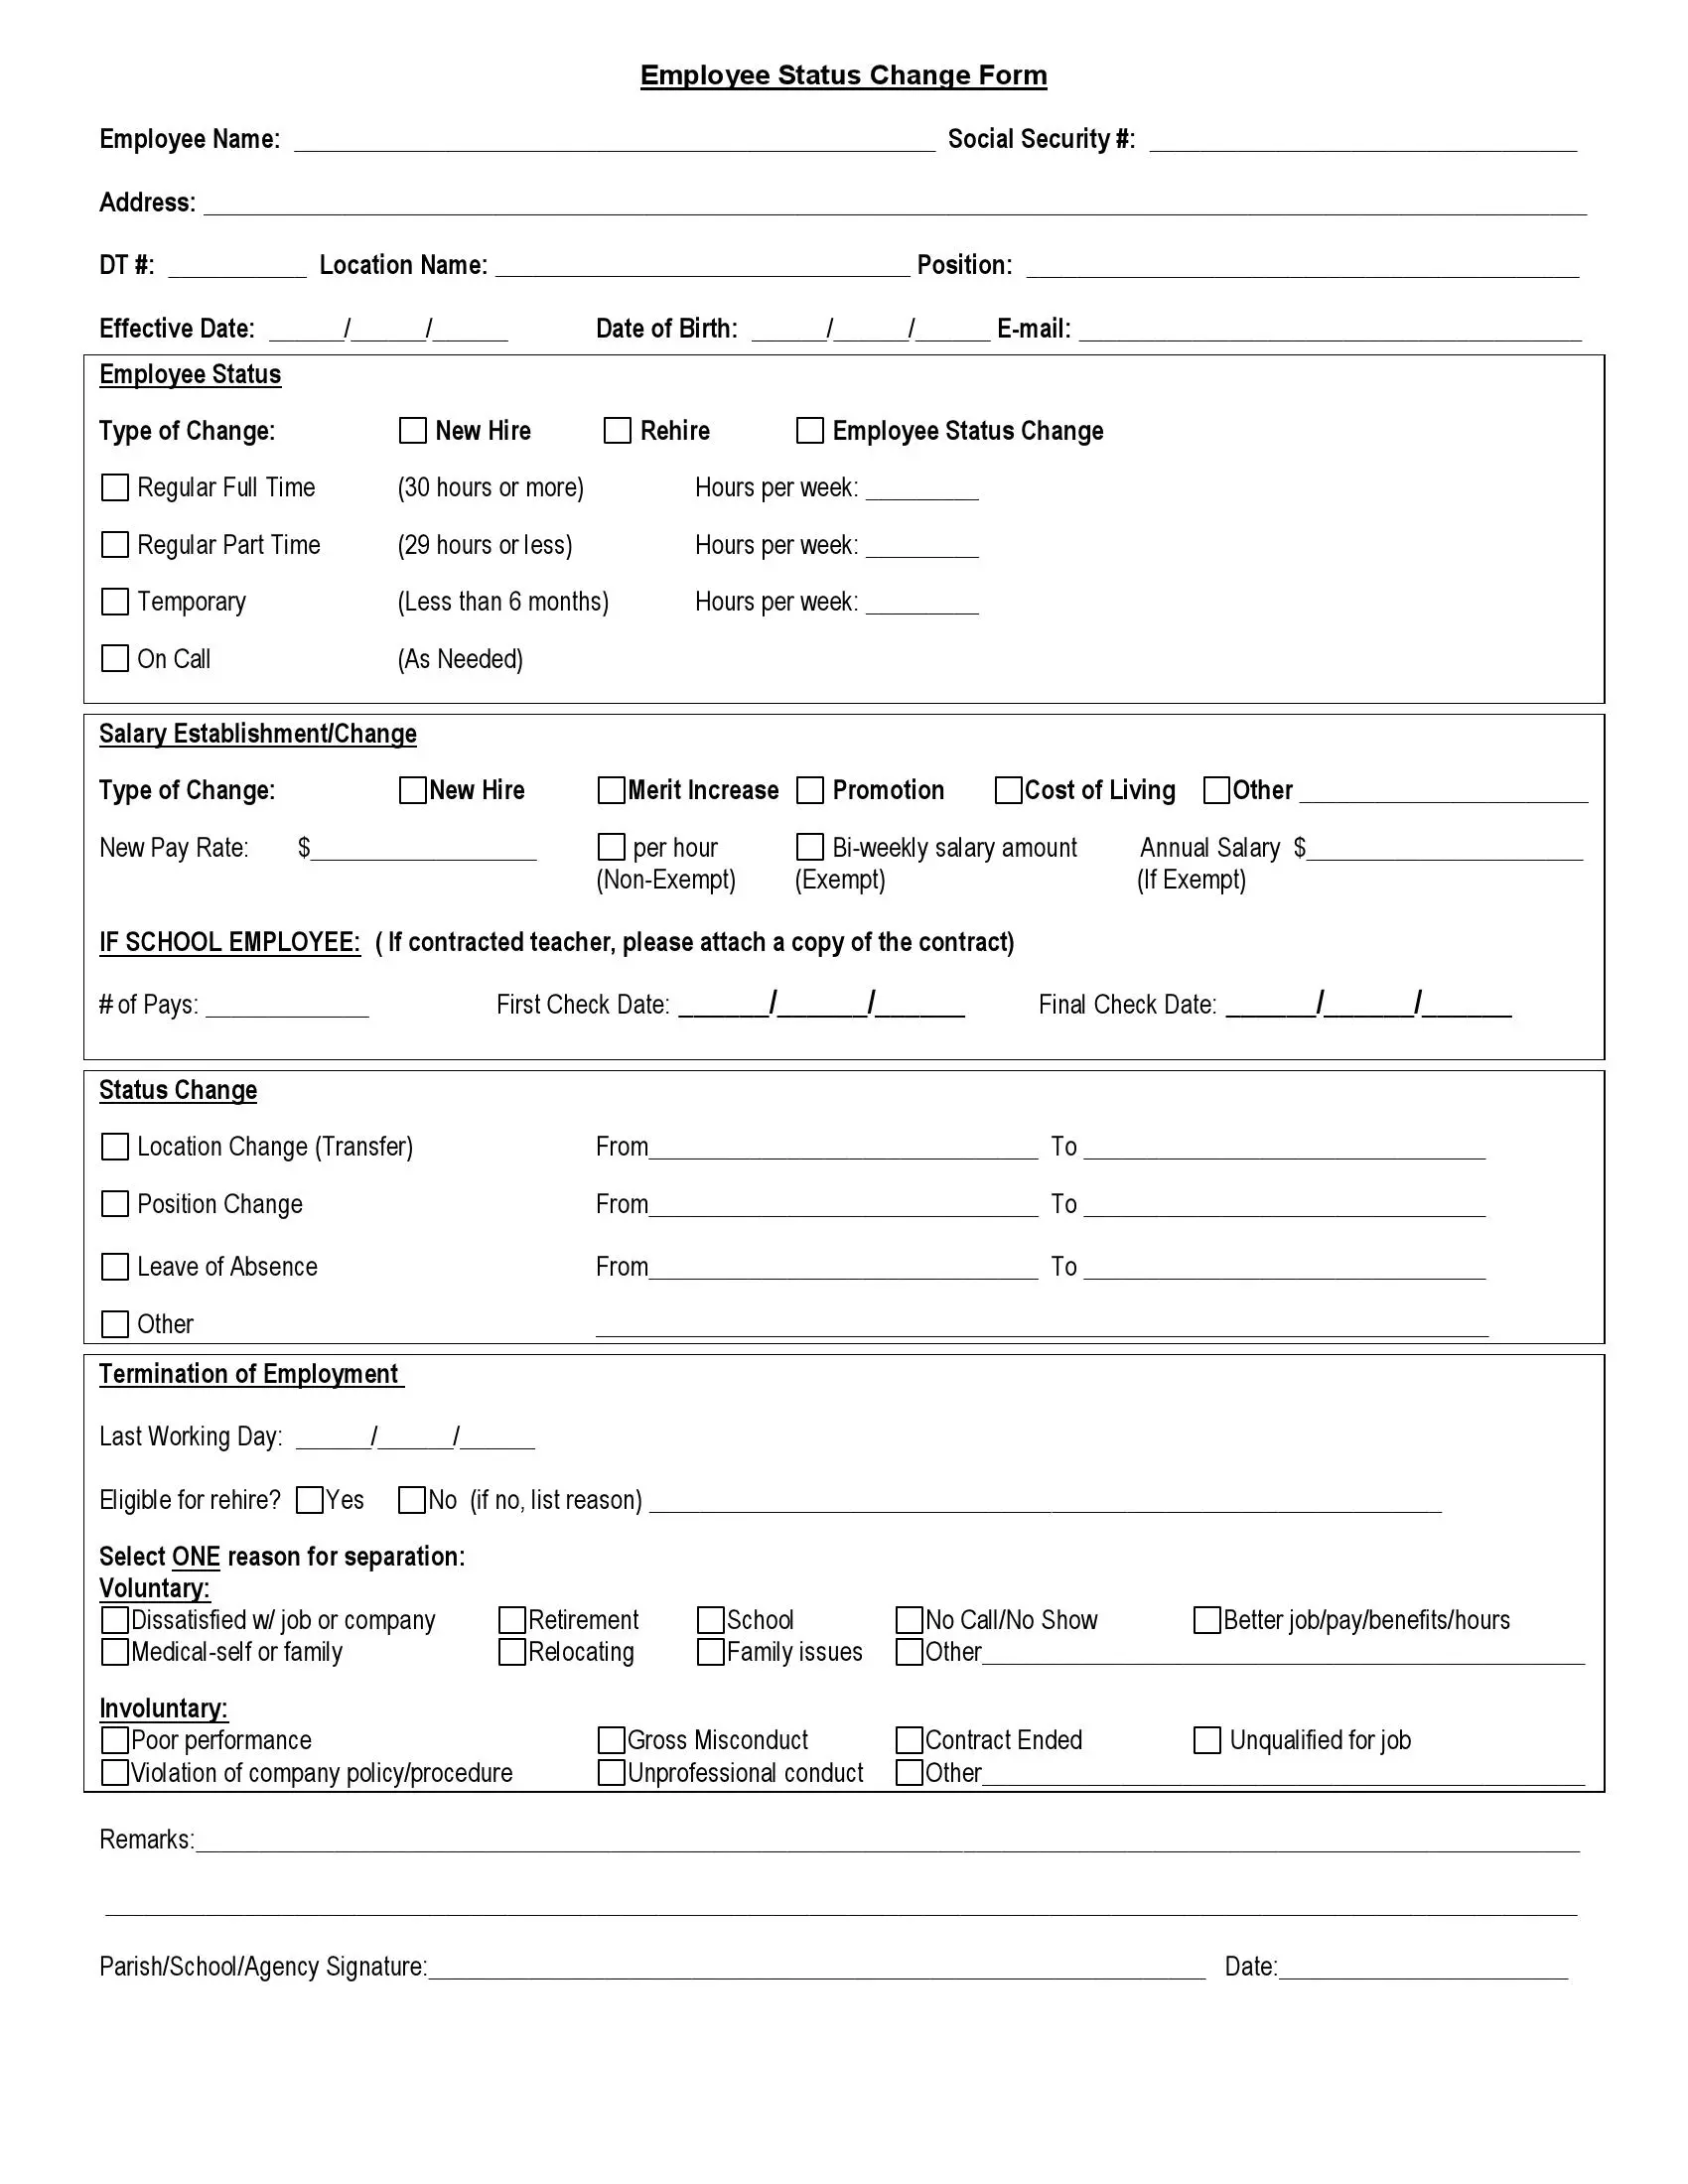 employee status change form preview